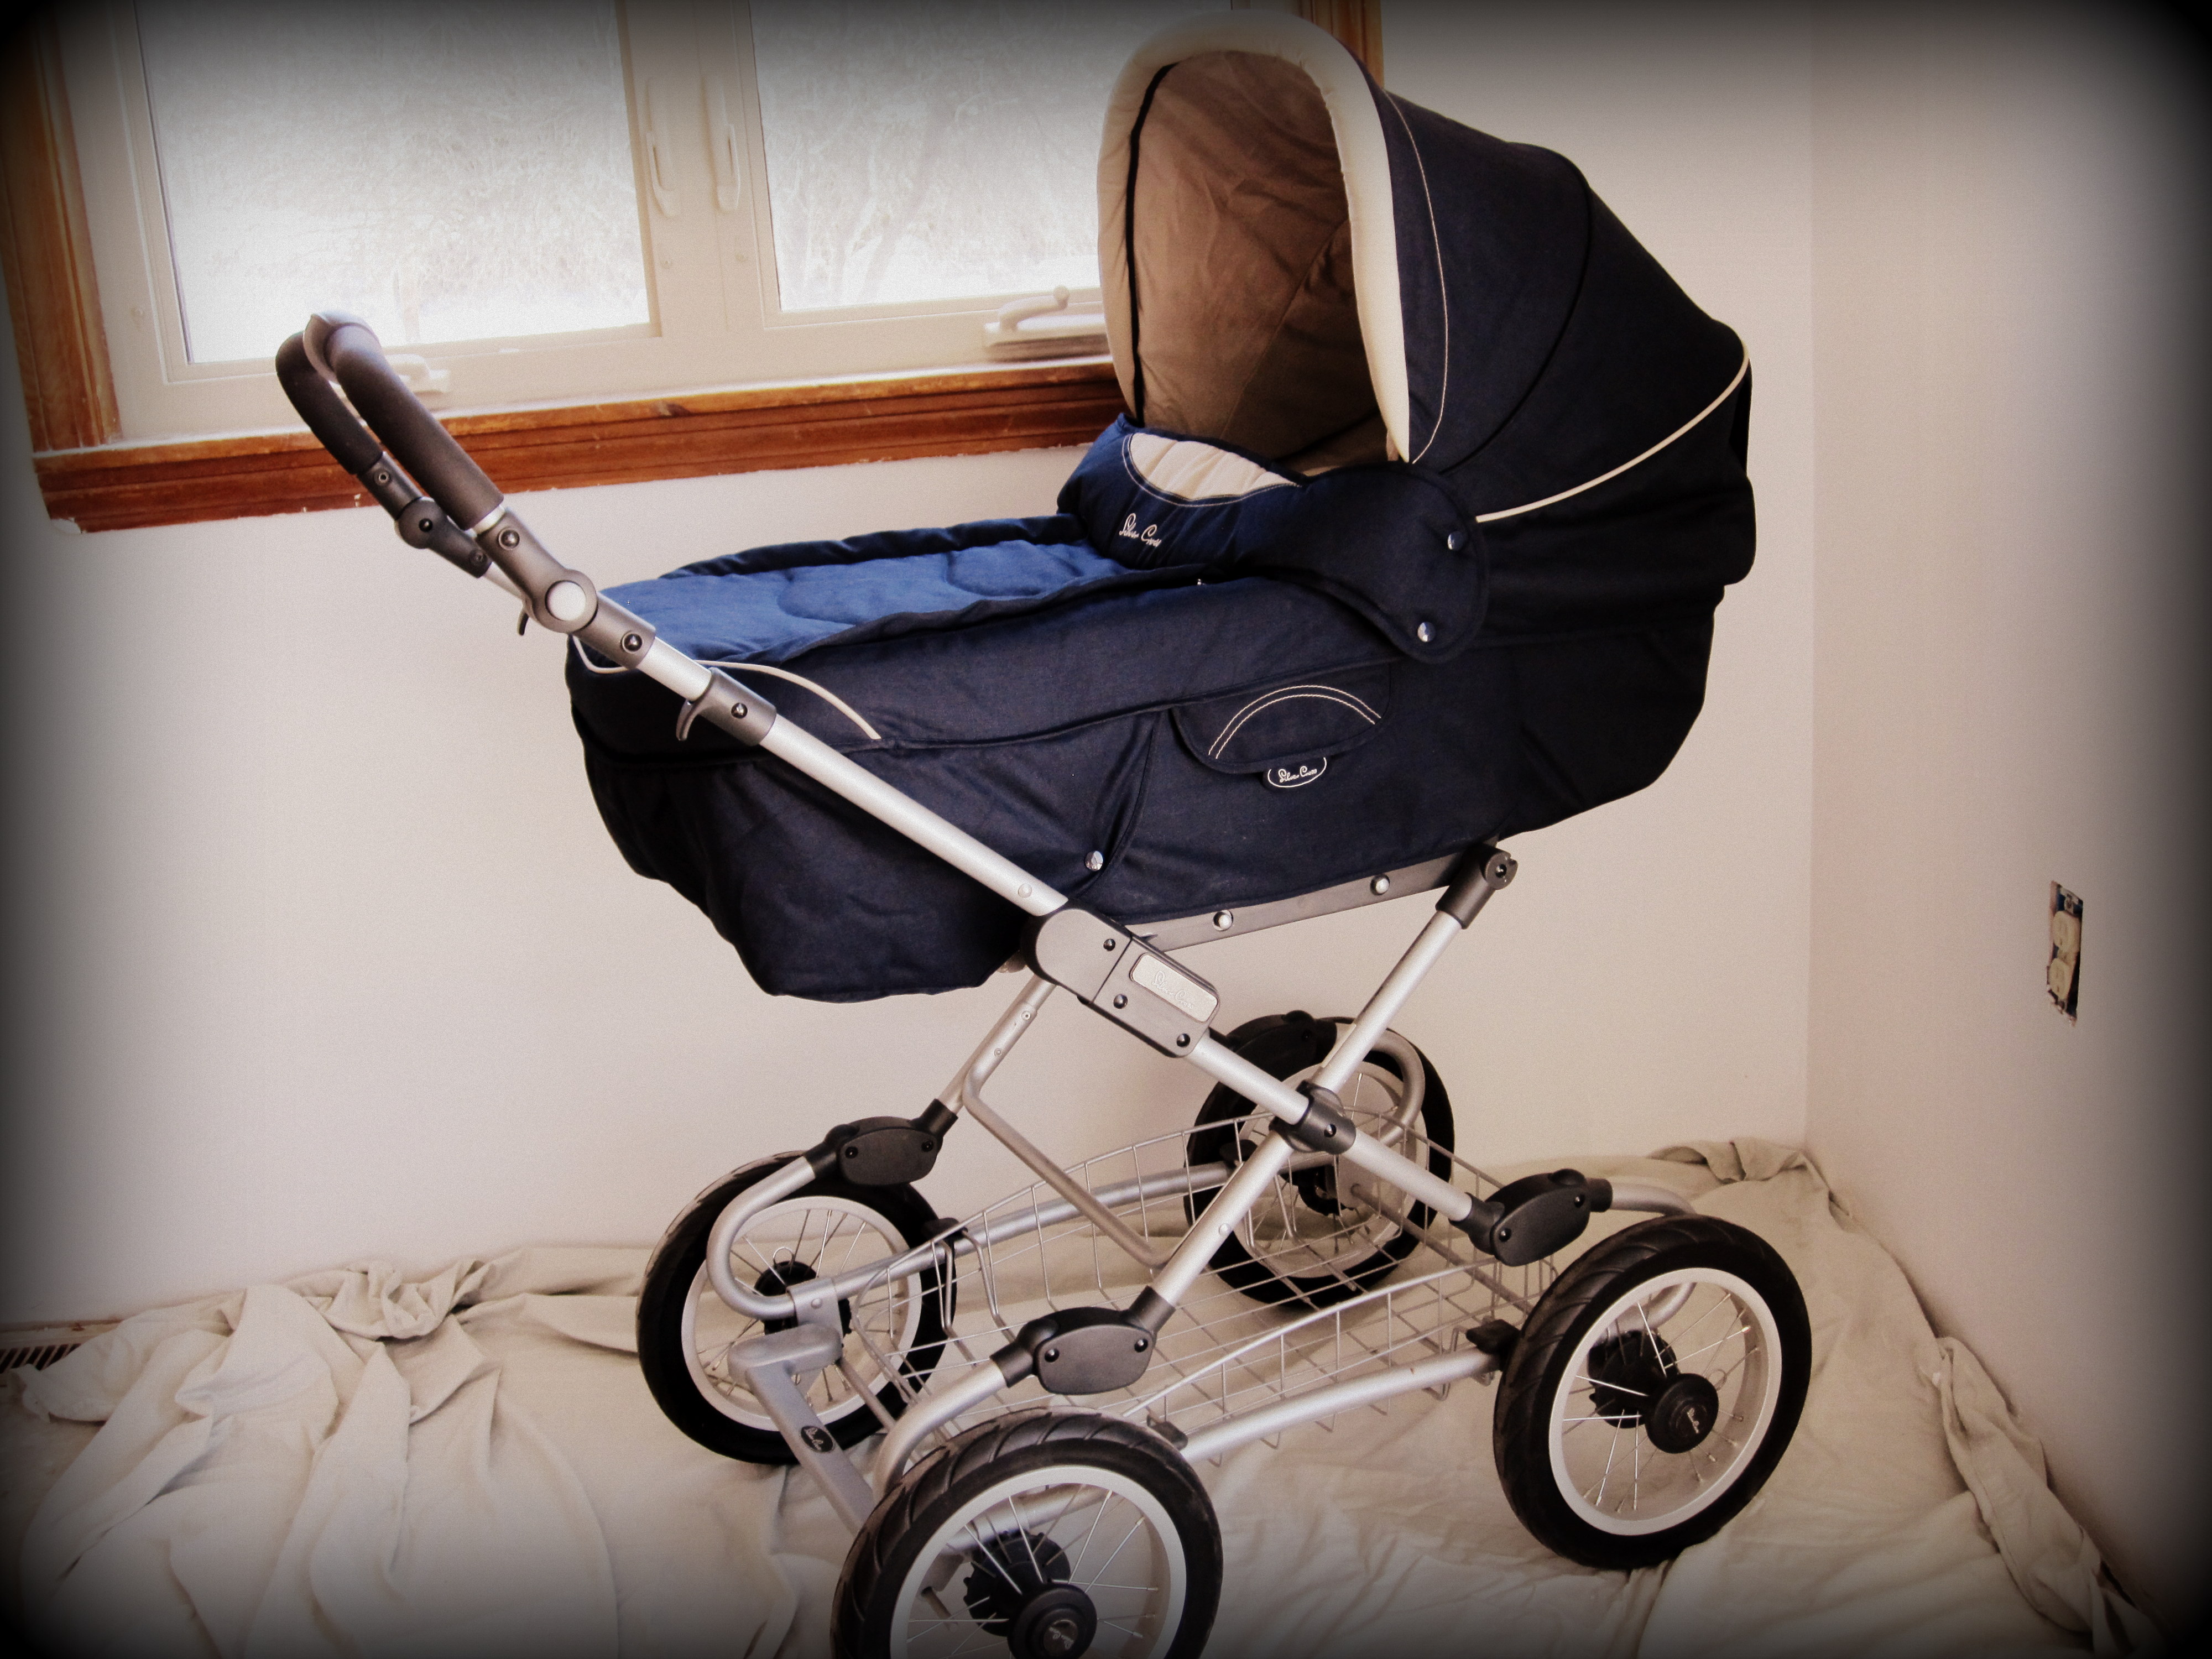 baby stroller meaning